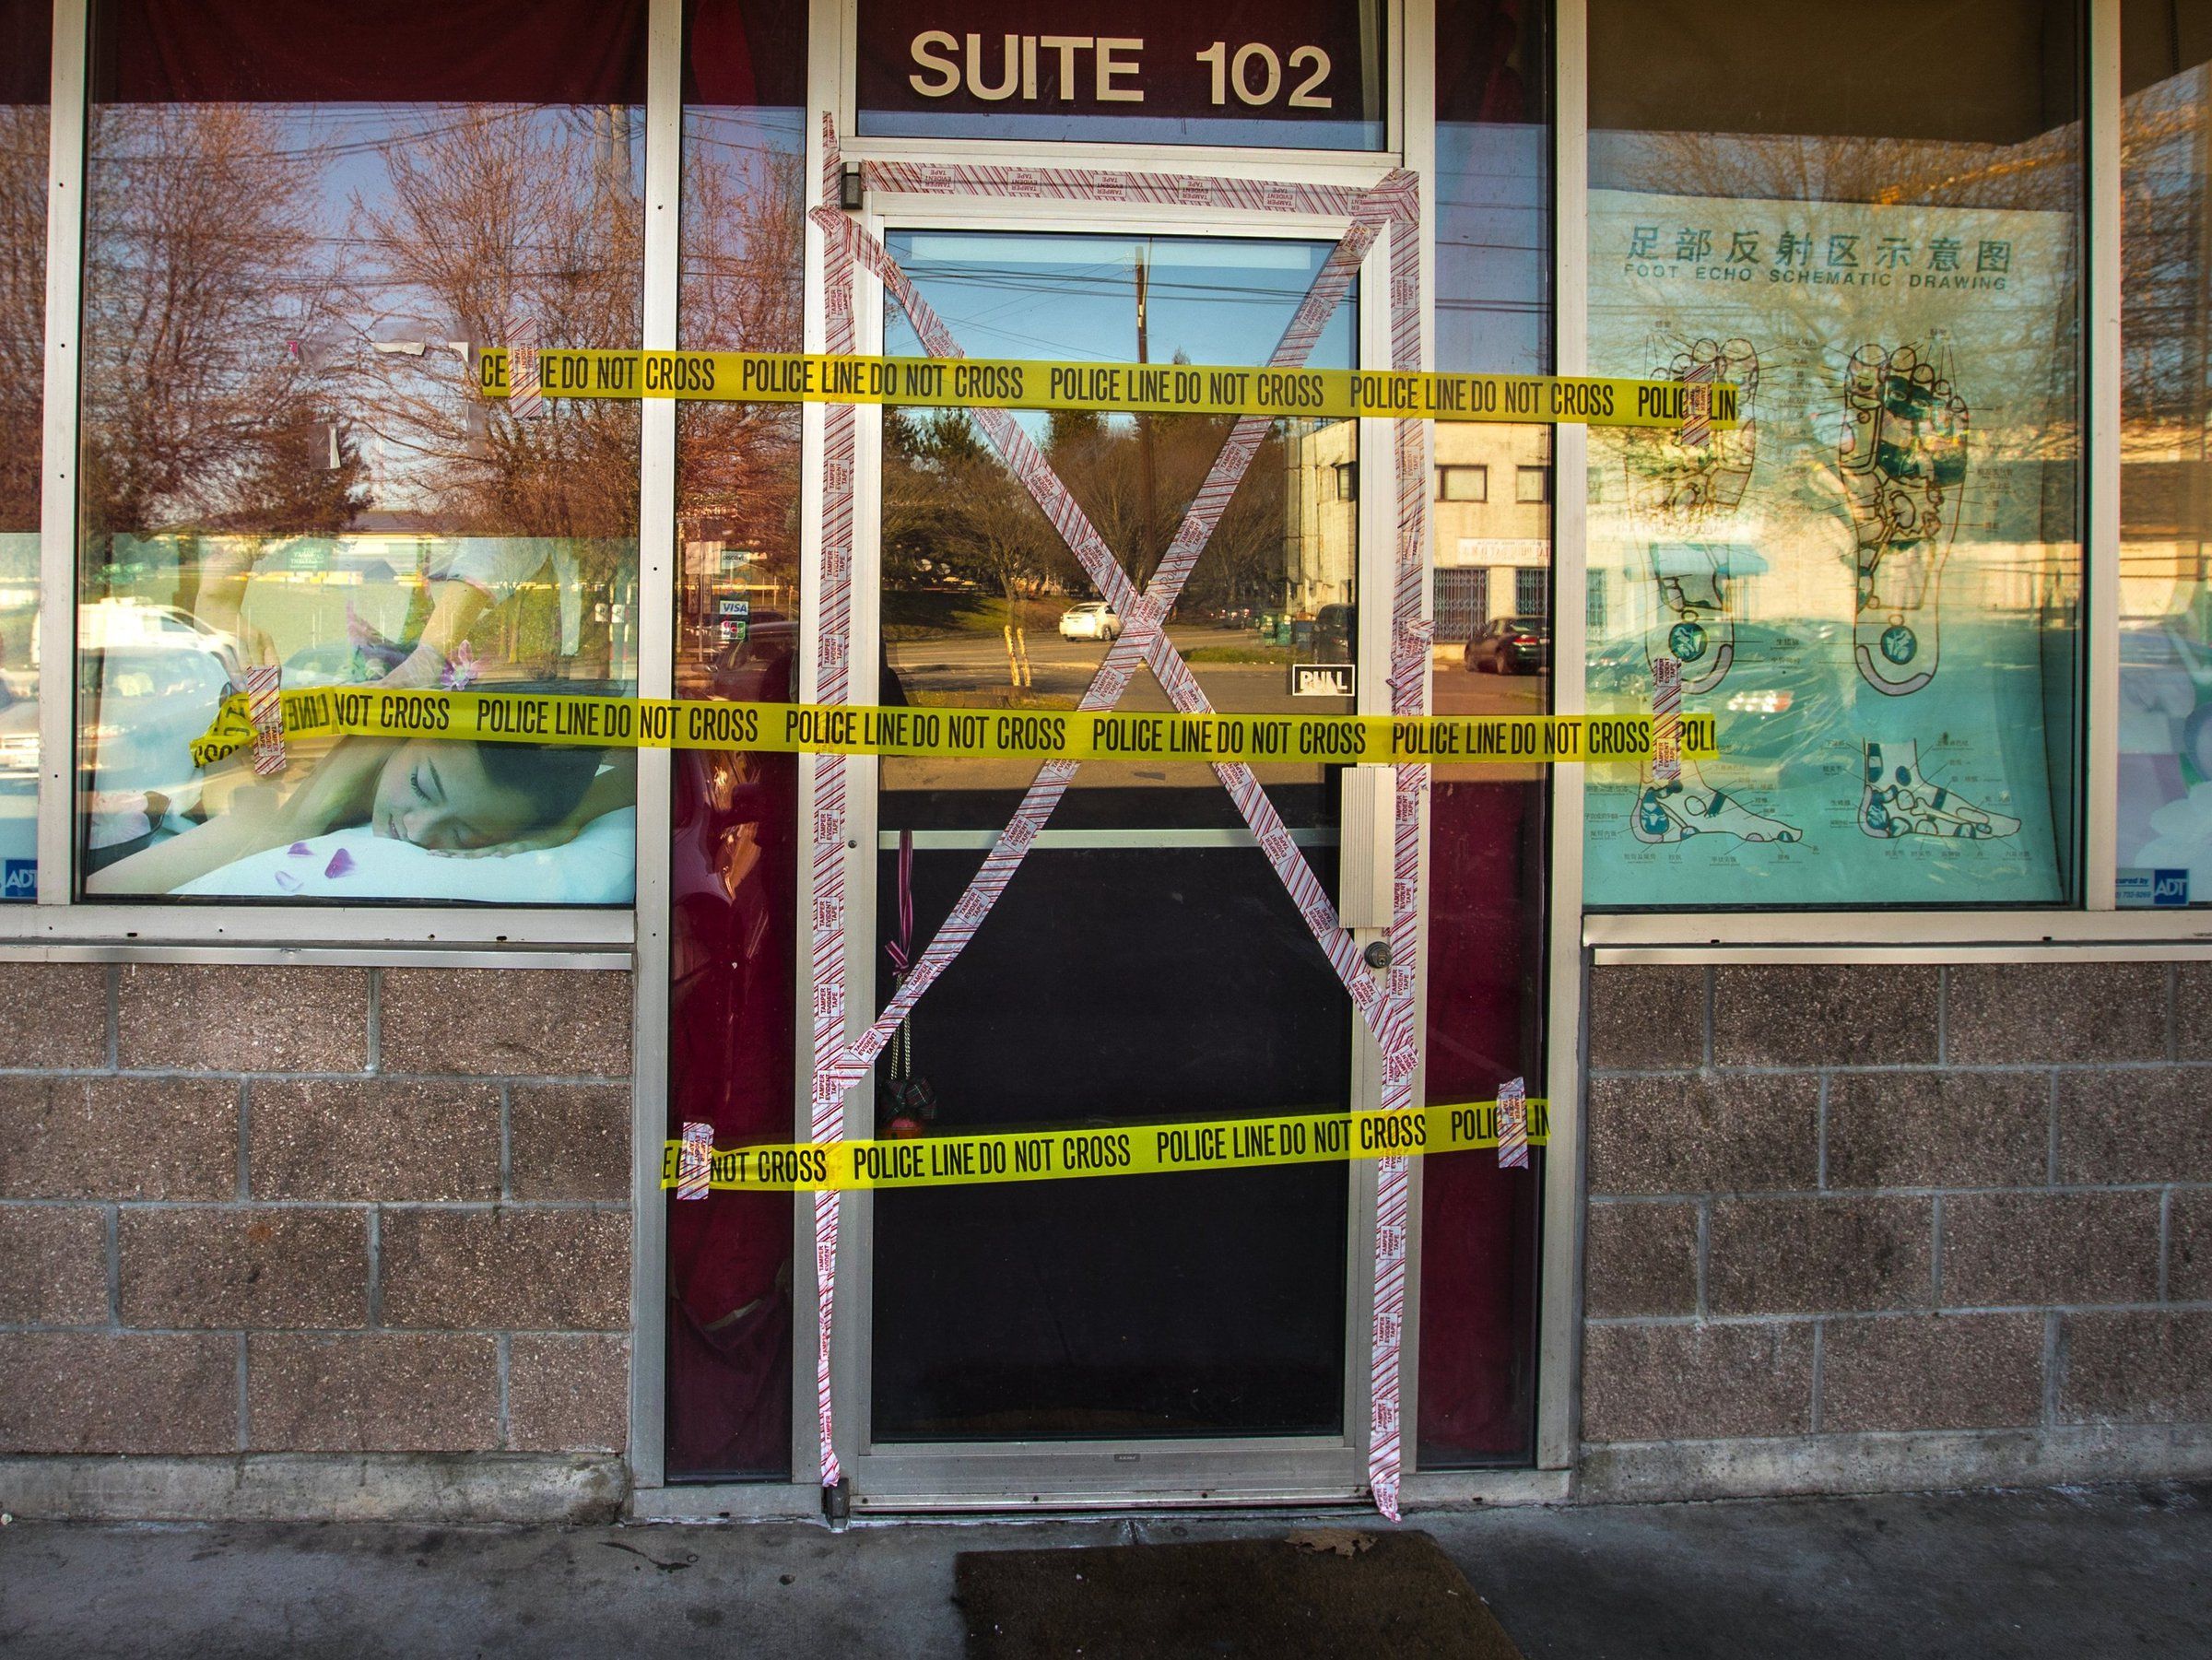 Major prostitution bust Seattle police raid 11 massage parlors, freeing 26 women The Seattle Times photo